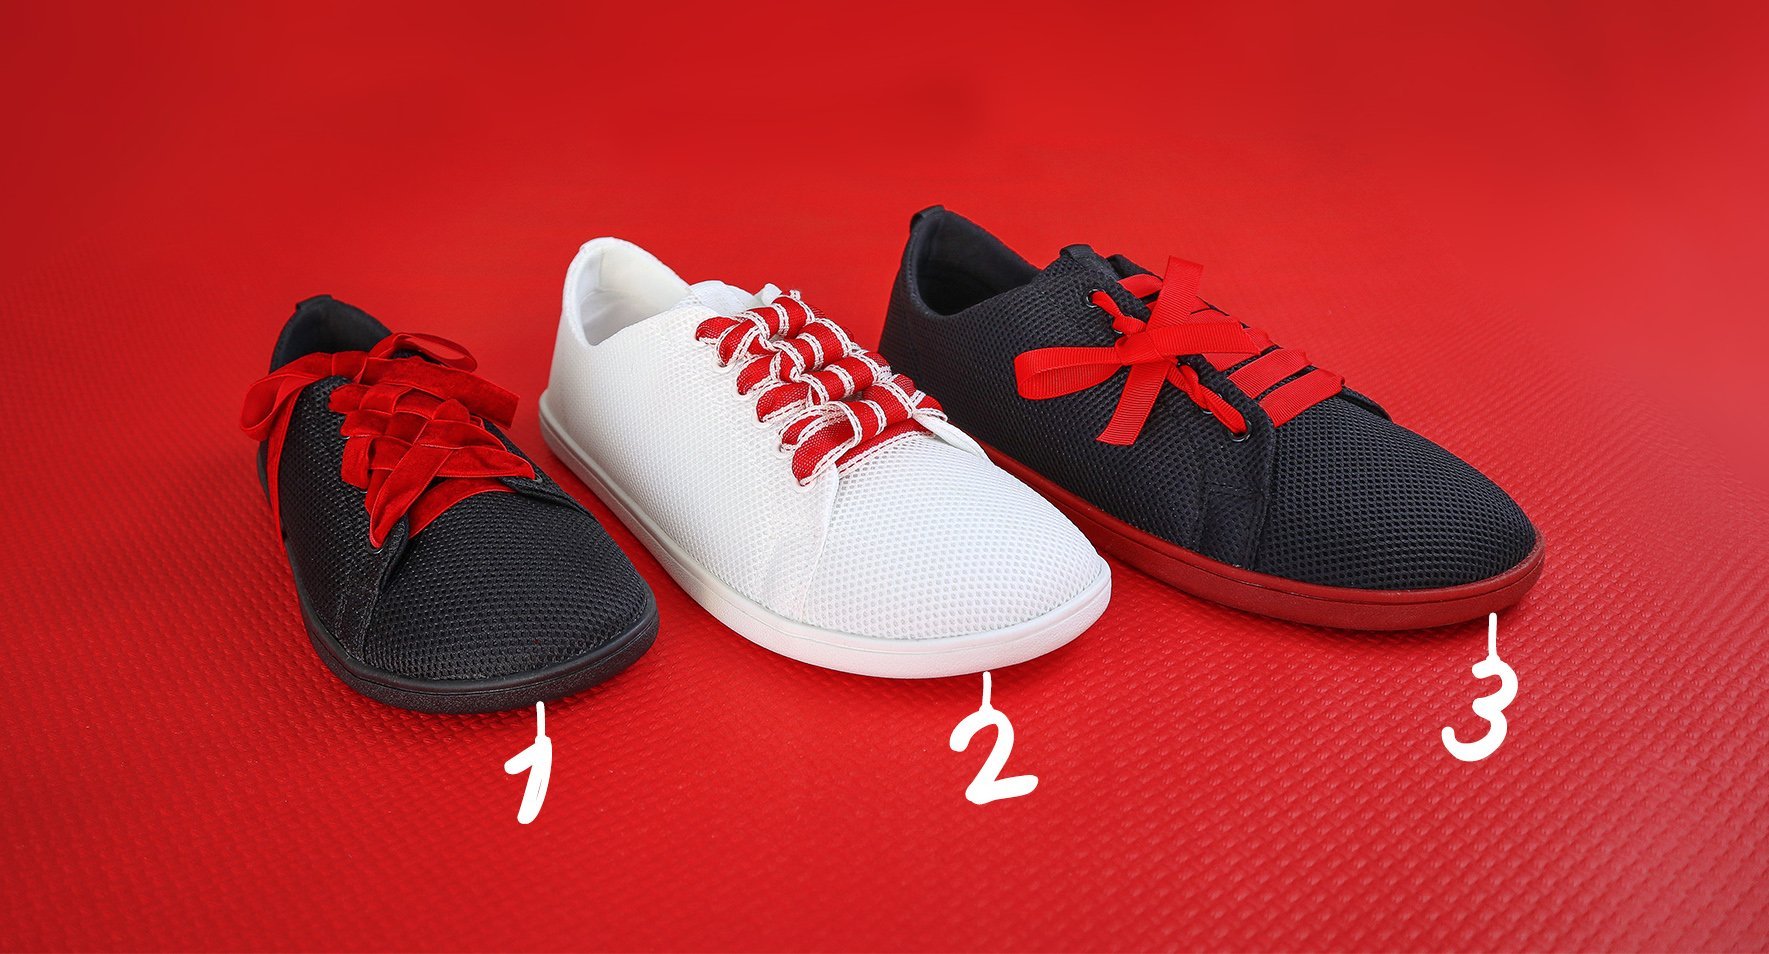 3 ways to tie your barefoot shoes for the holidays